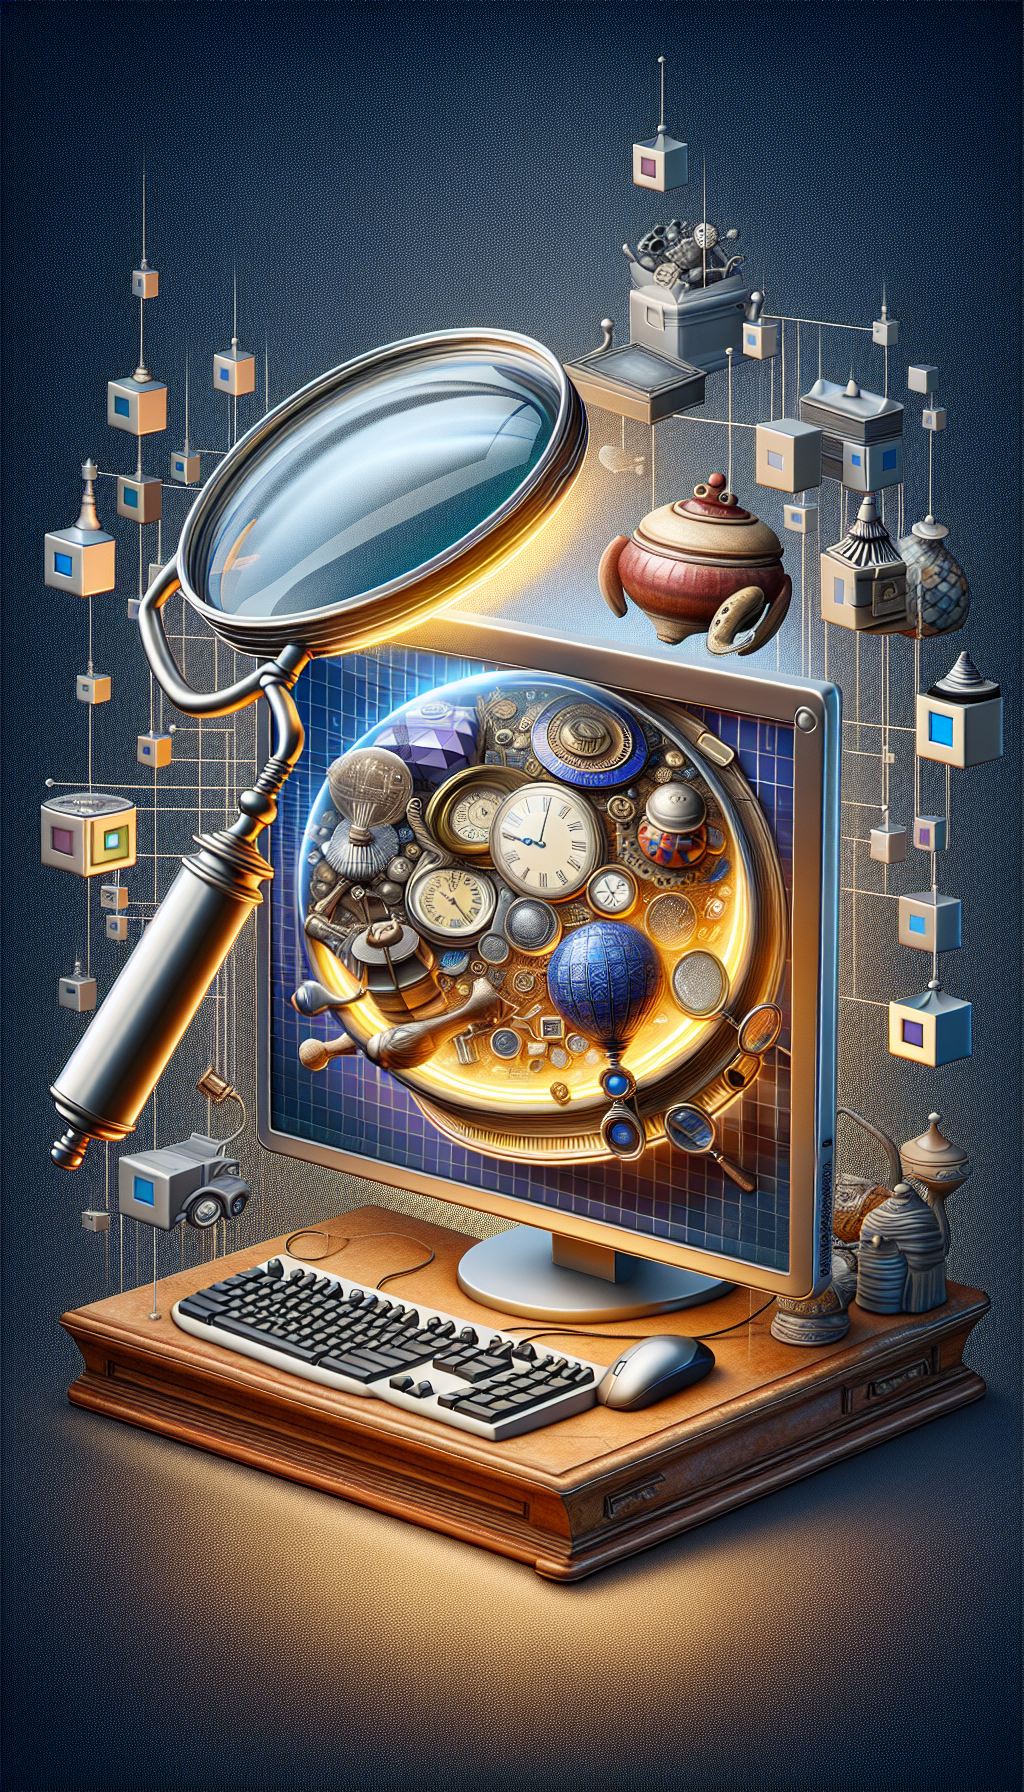 An intricately detailed digital illustration featuring a magnifying glass hovering over a glowing computer screen that displays a mosaic of antiques—a watch, a vase, and jewelry. Through the magnifying glass, the antiques transform into digital pixels, symbolizing their appraisal values being calculated in real time online. Whimsical mouse cursors double as auctioneer's gavels around the frame.